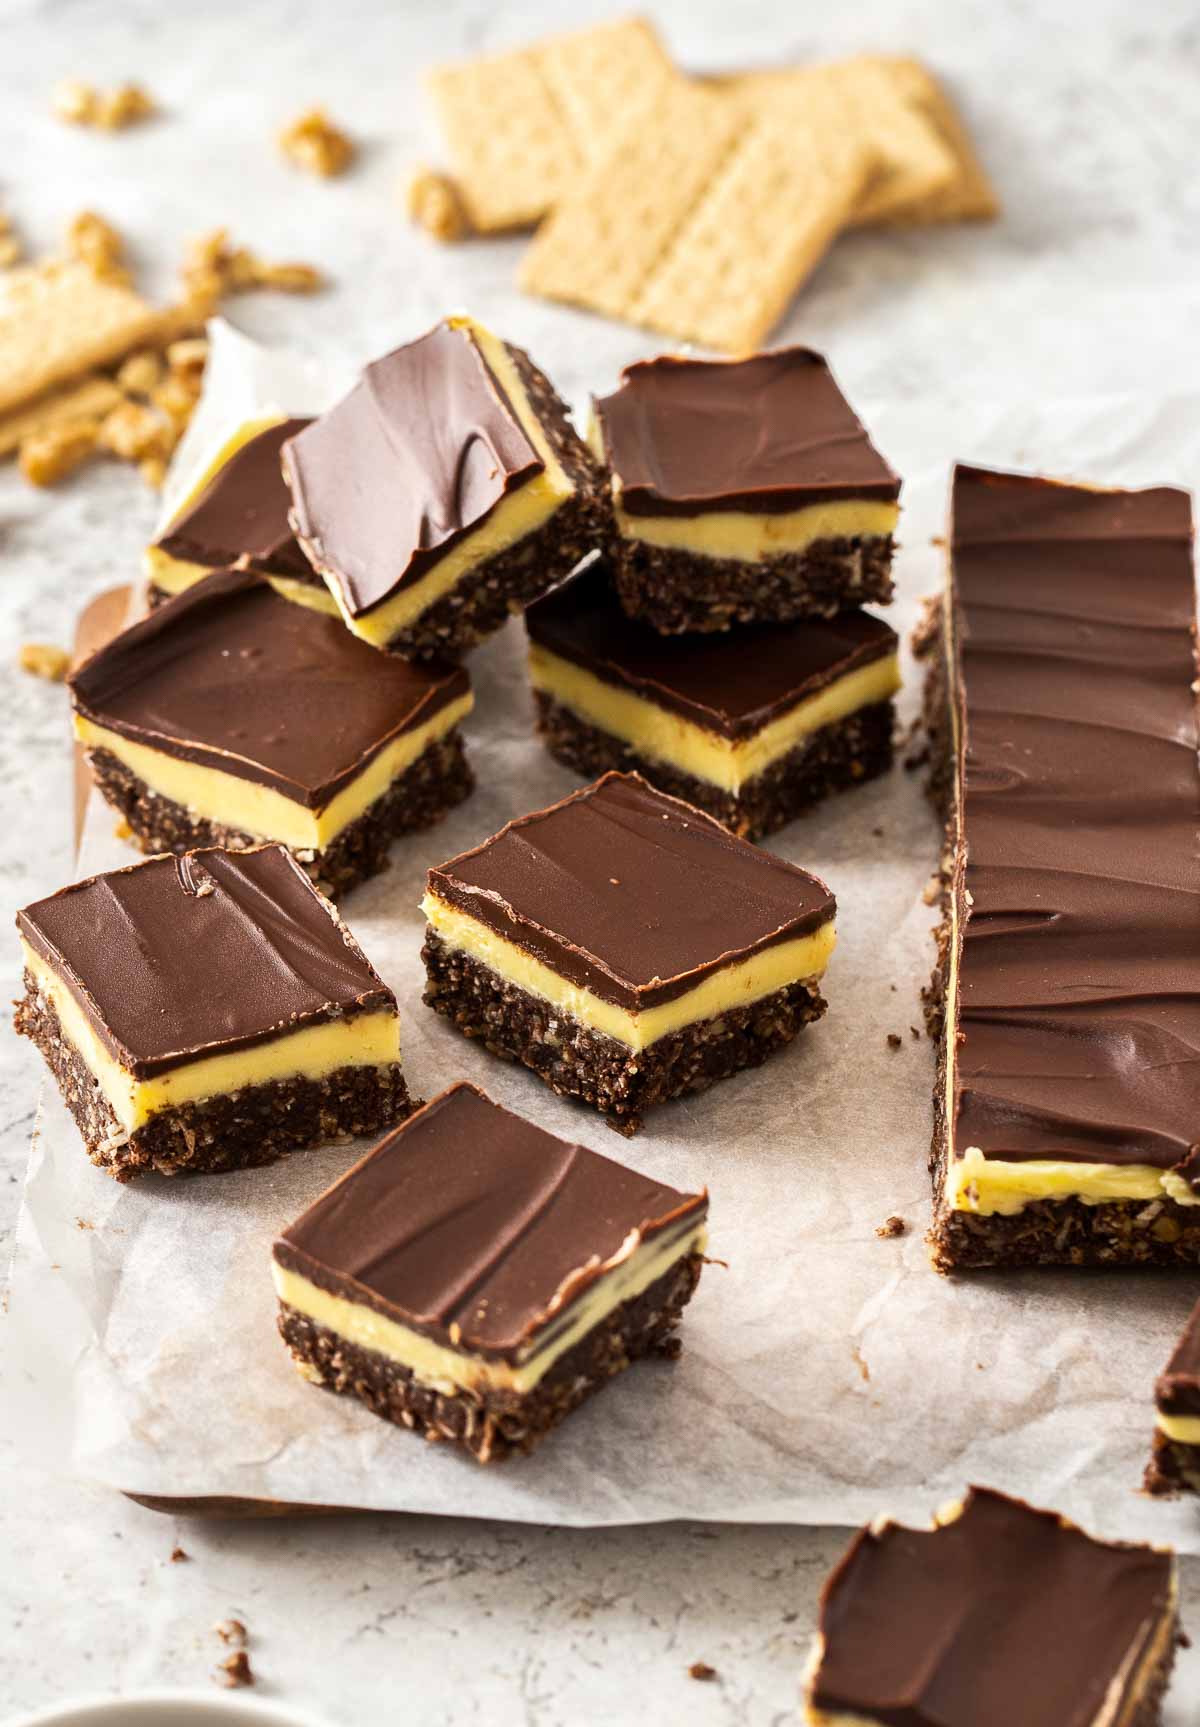 Several Nanaimo bars on parchment paper.